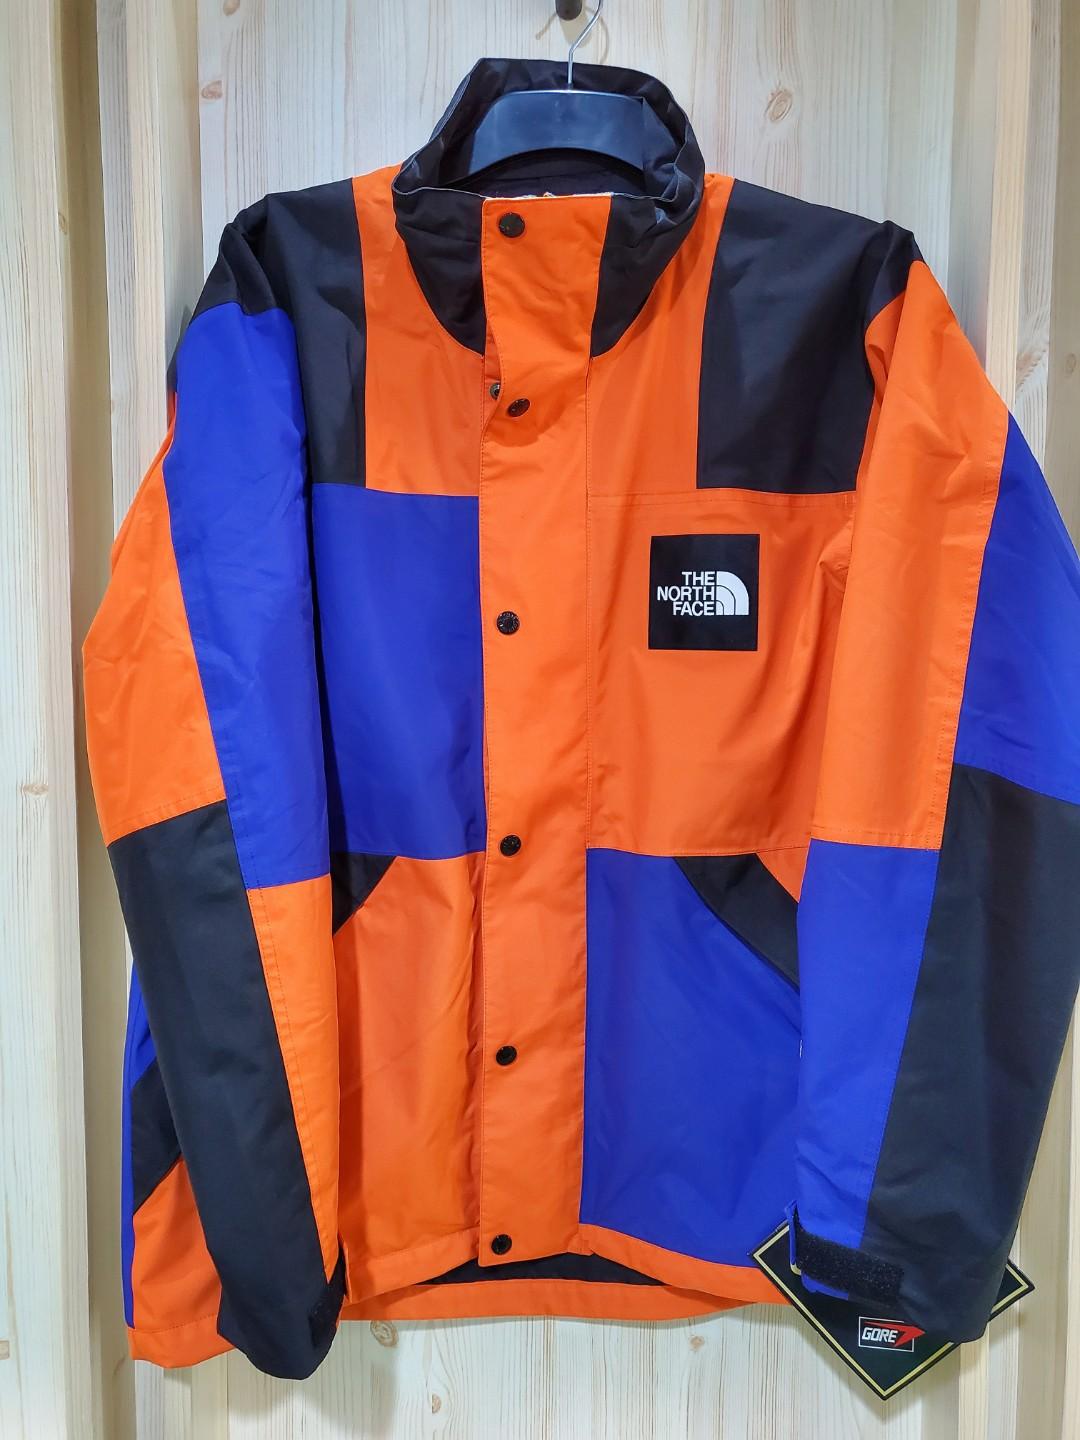 THE NORTH FACE RAGE GTX Shell jacket-